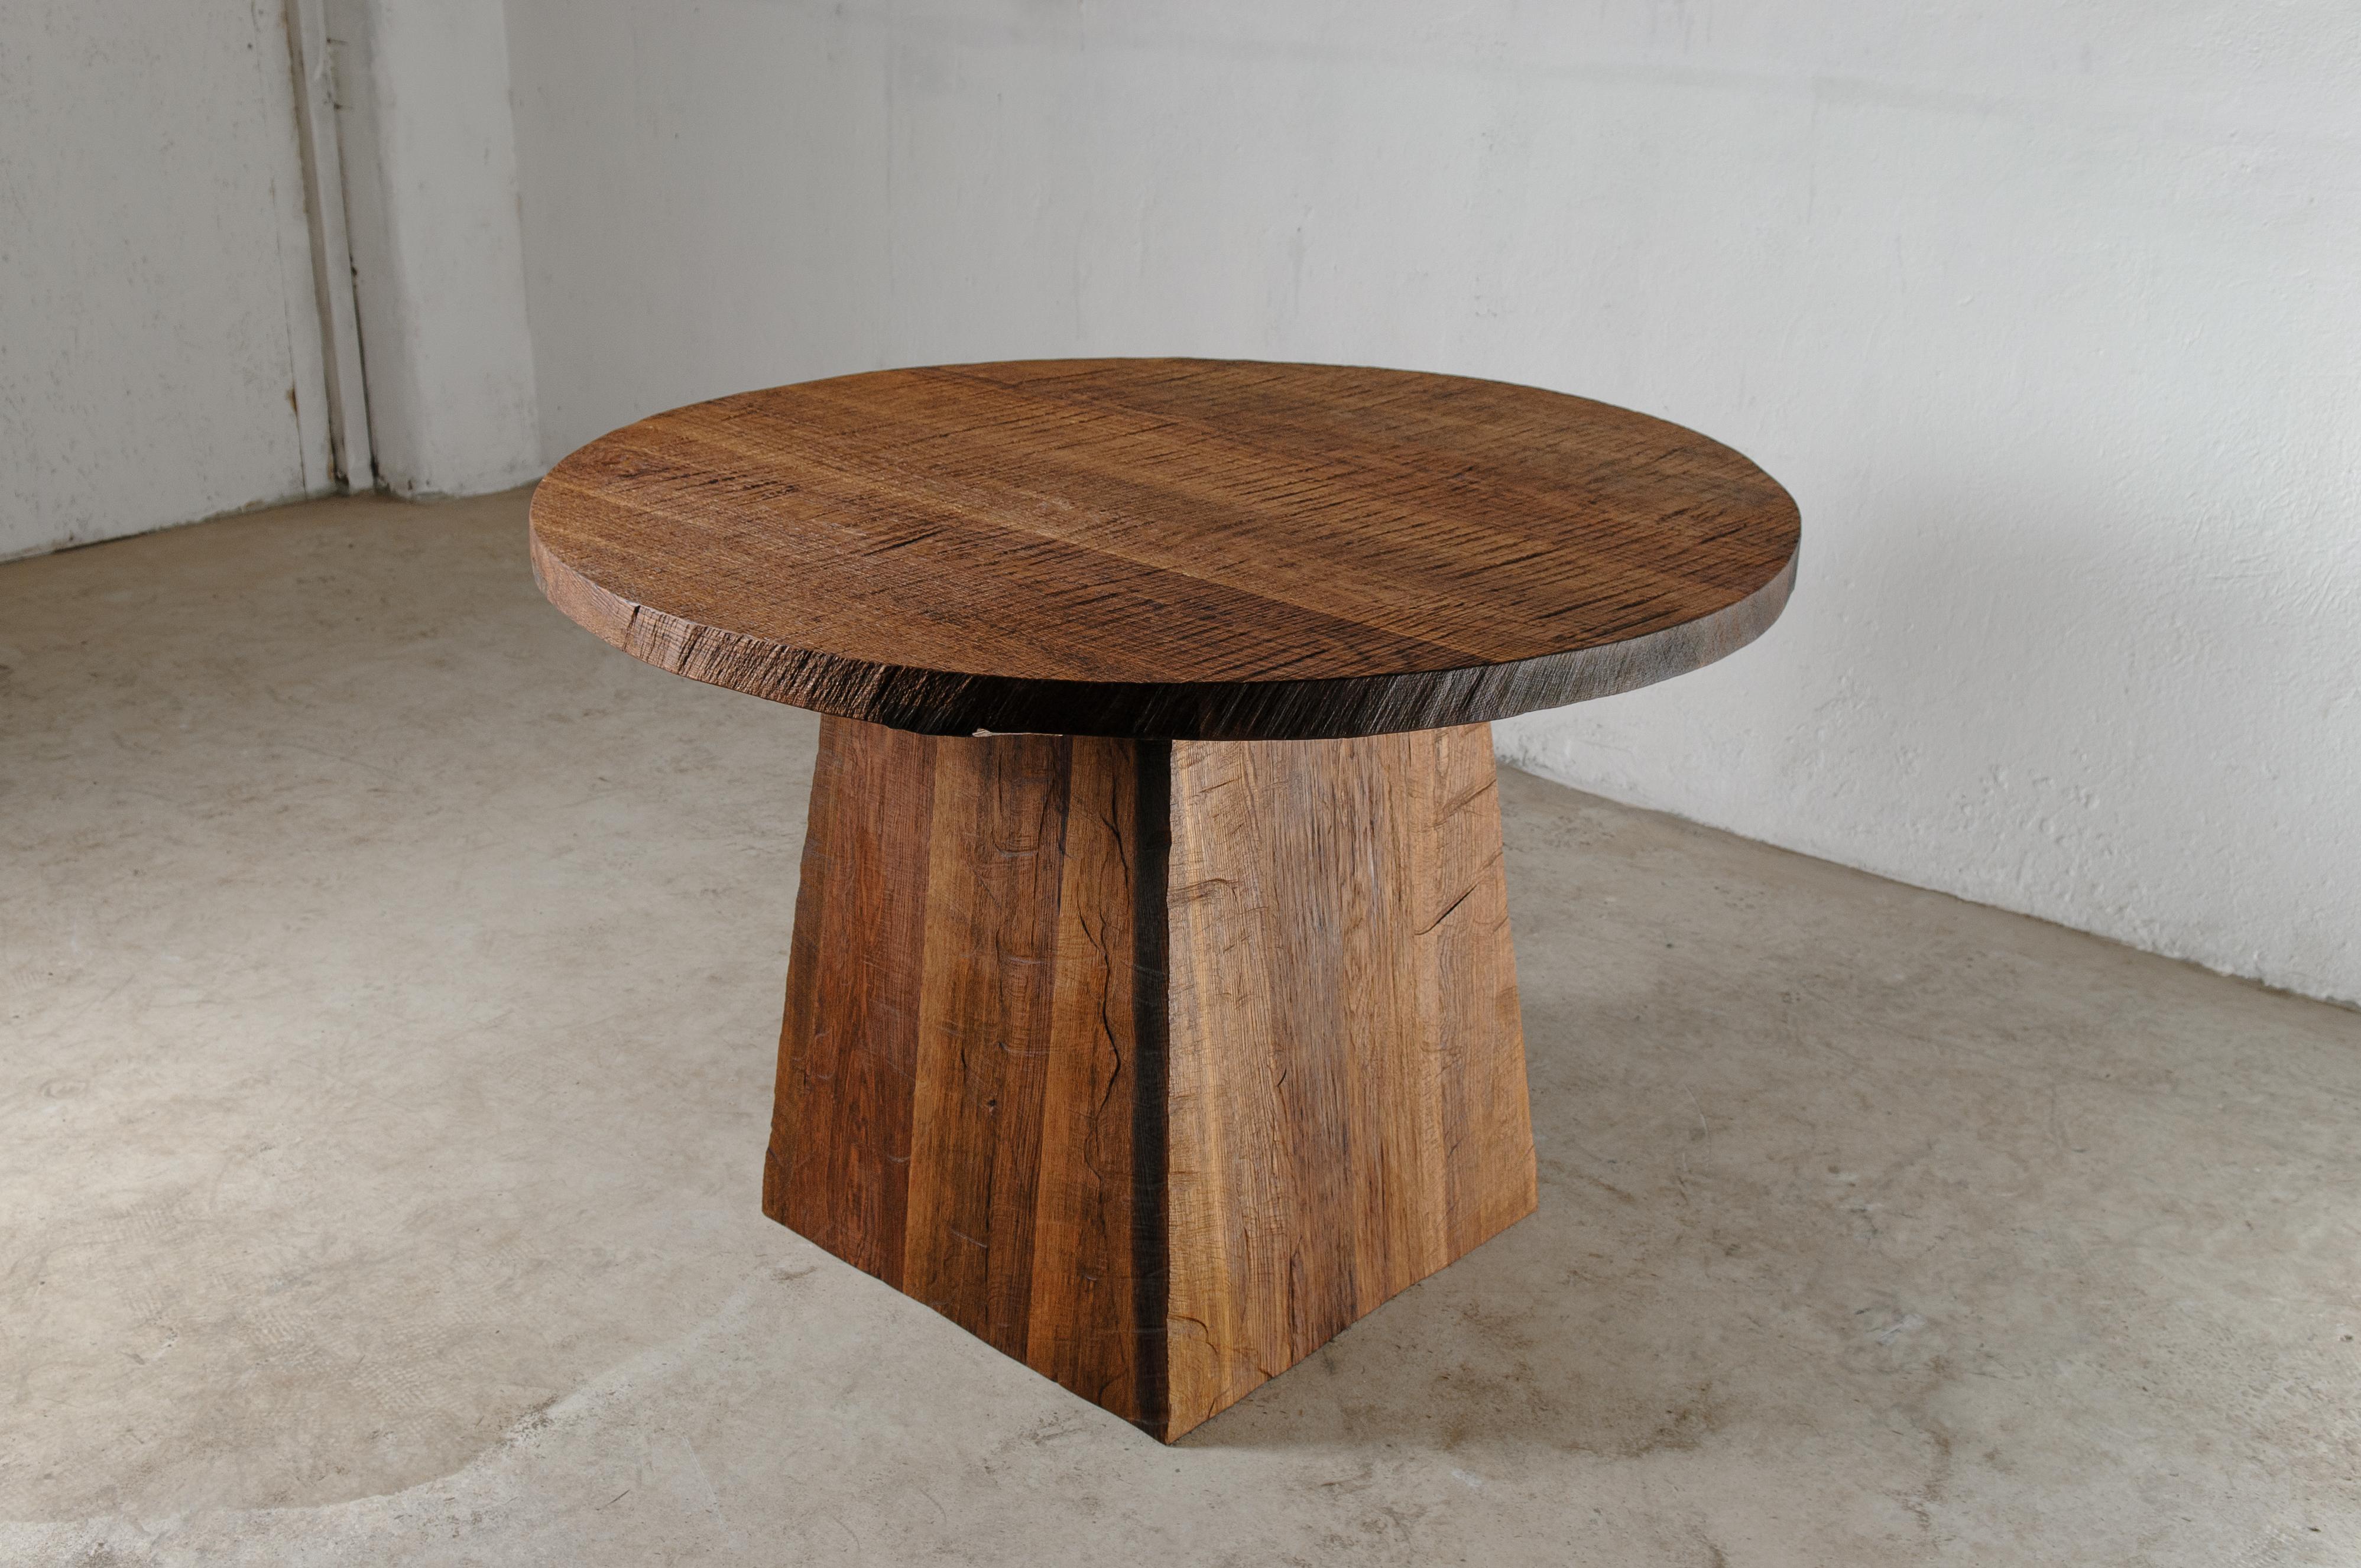 Brutalist center table N1 in Solid Oakwood

Dimensions: 
D. 100 x H. 76 cm

Unique piece made to order.

Founded by artist Denis Milovanov, SÓHA design studio conceives and produces furniture design and decorative objects in solid oak in an